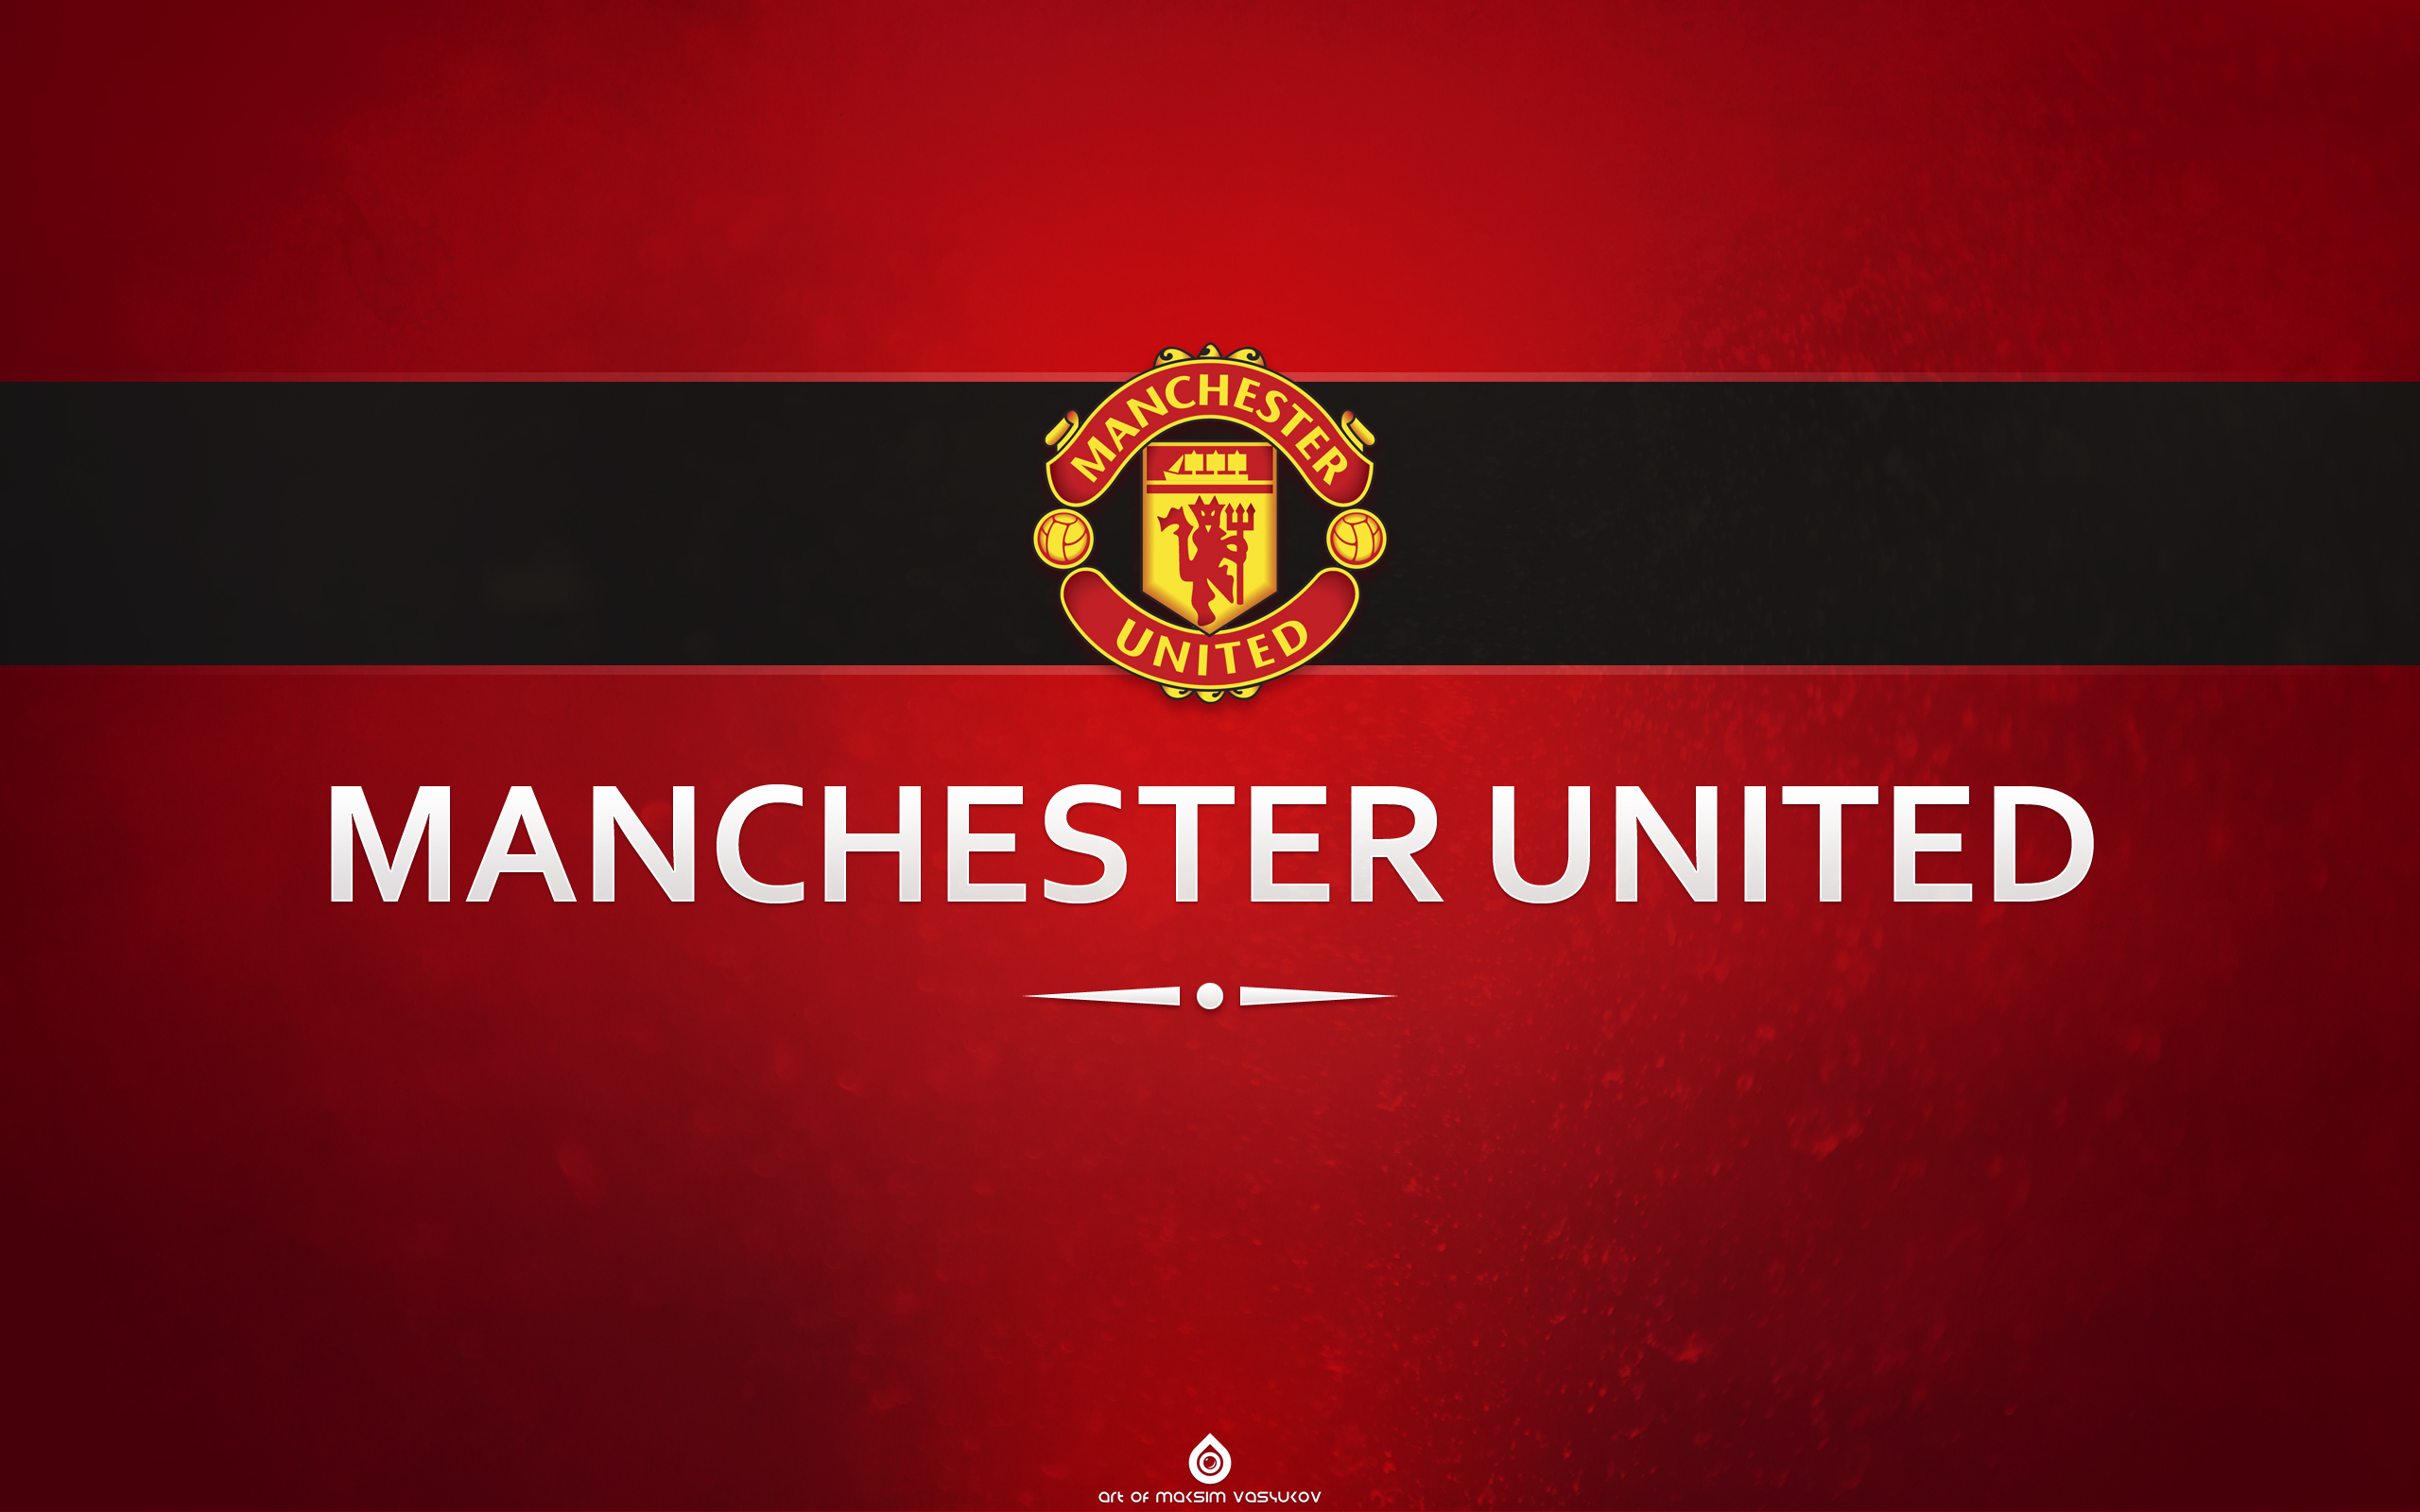 Manchester United Image Icons Wallpaper And Photos On